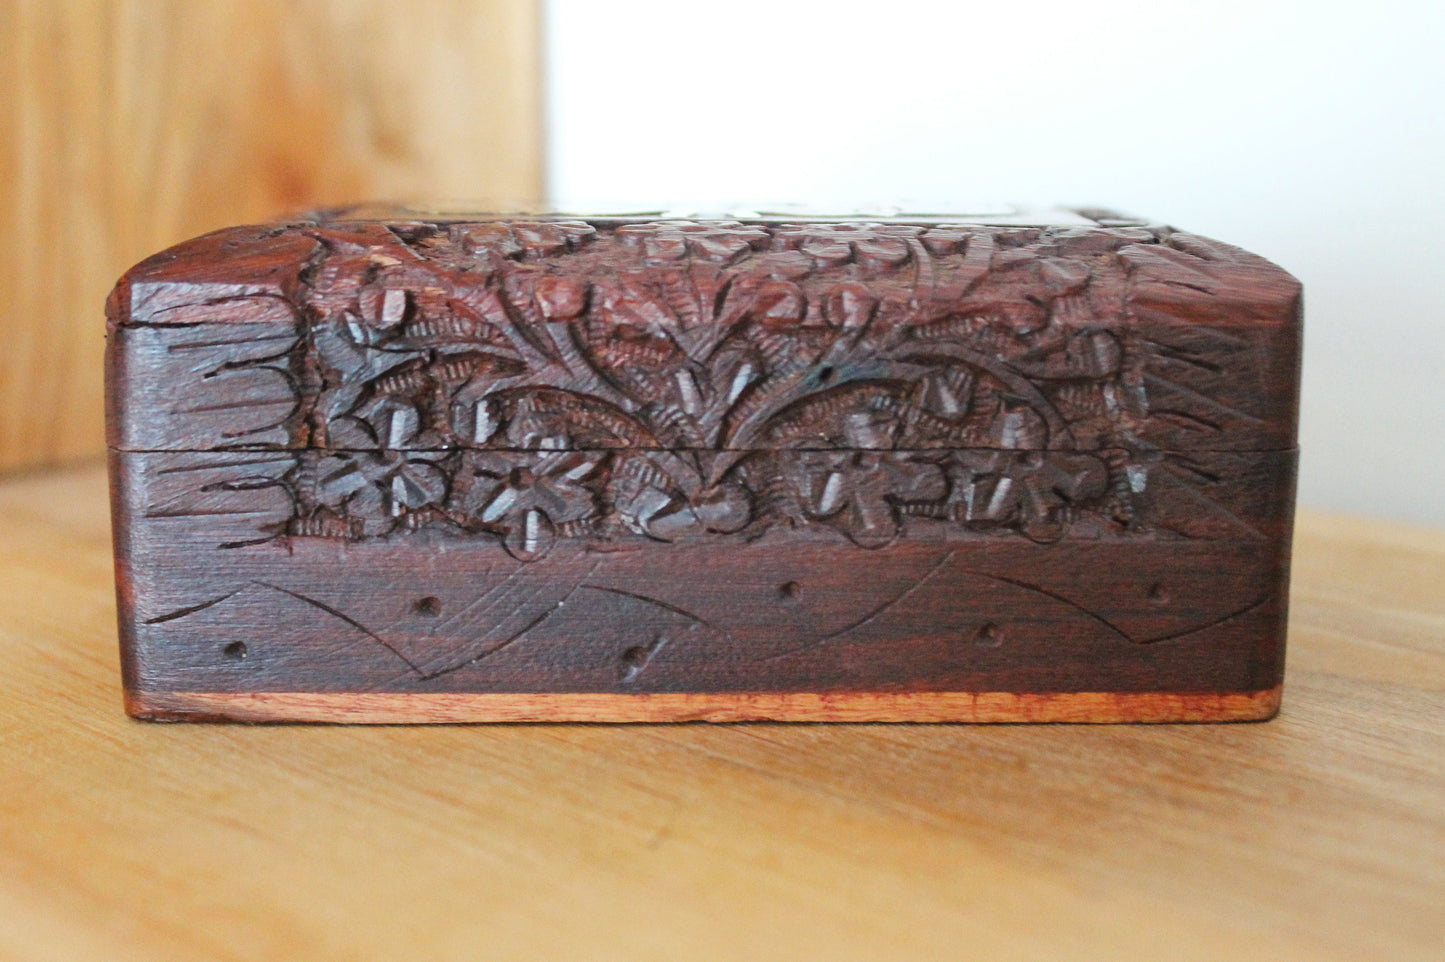 Vintage wooden carved box with brass elephants - Indian style vintage jewelry box - 1970s